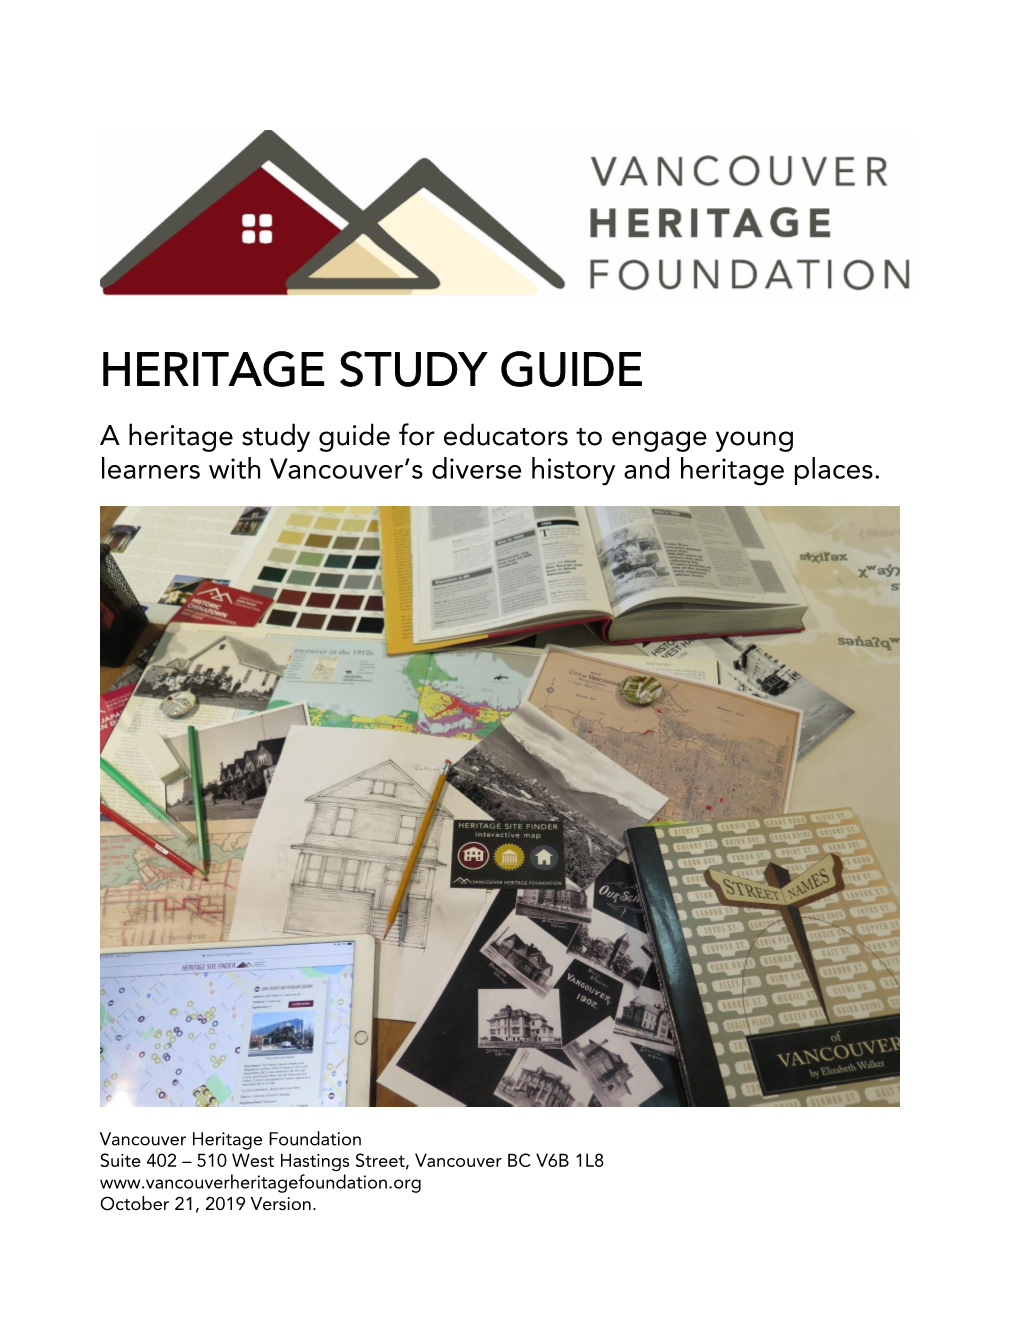 Heritage Study Guide